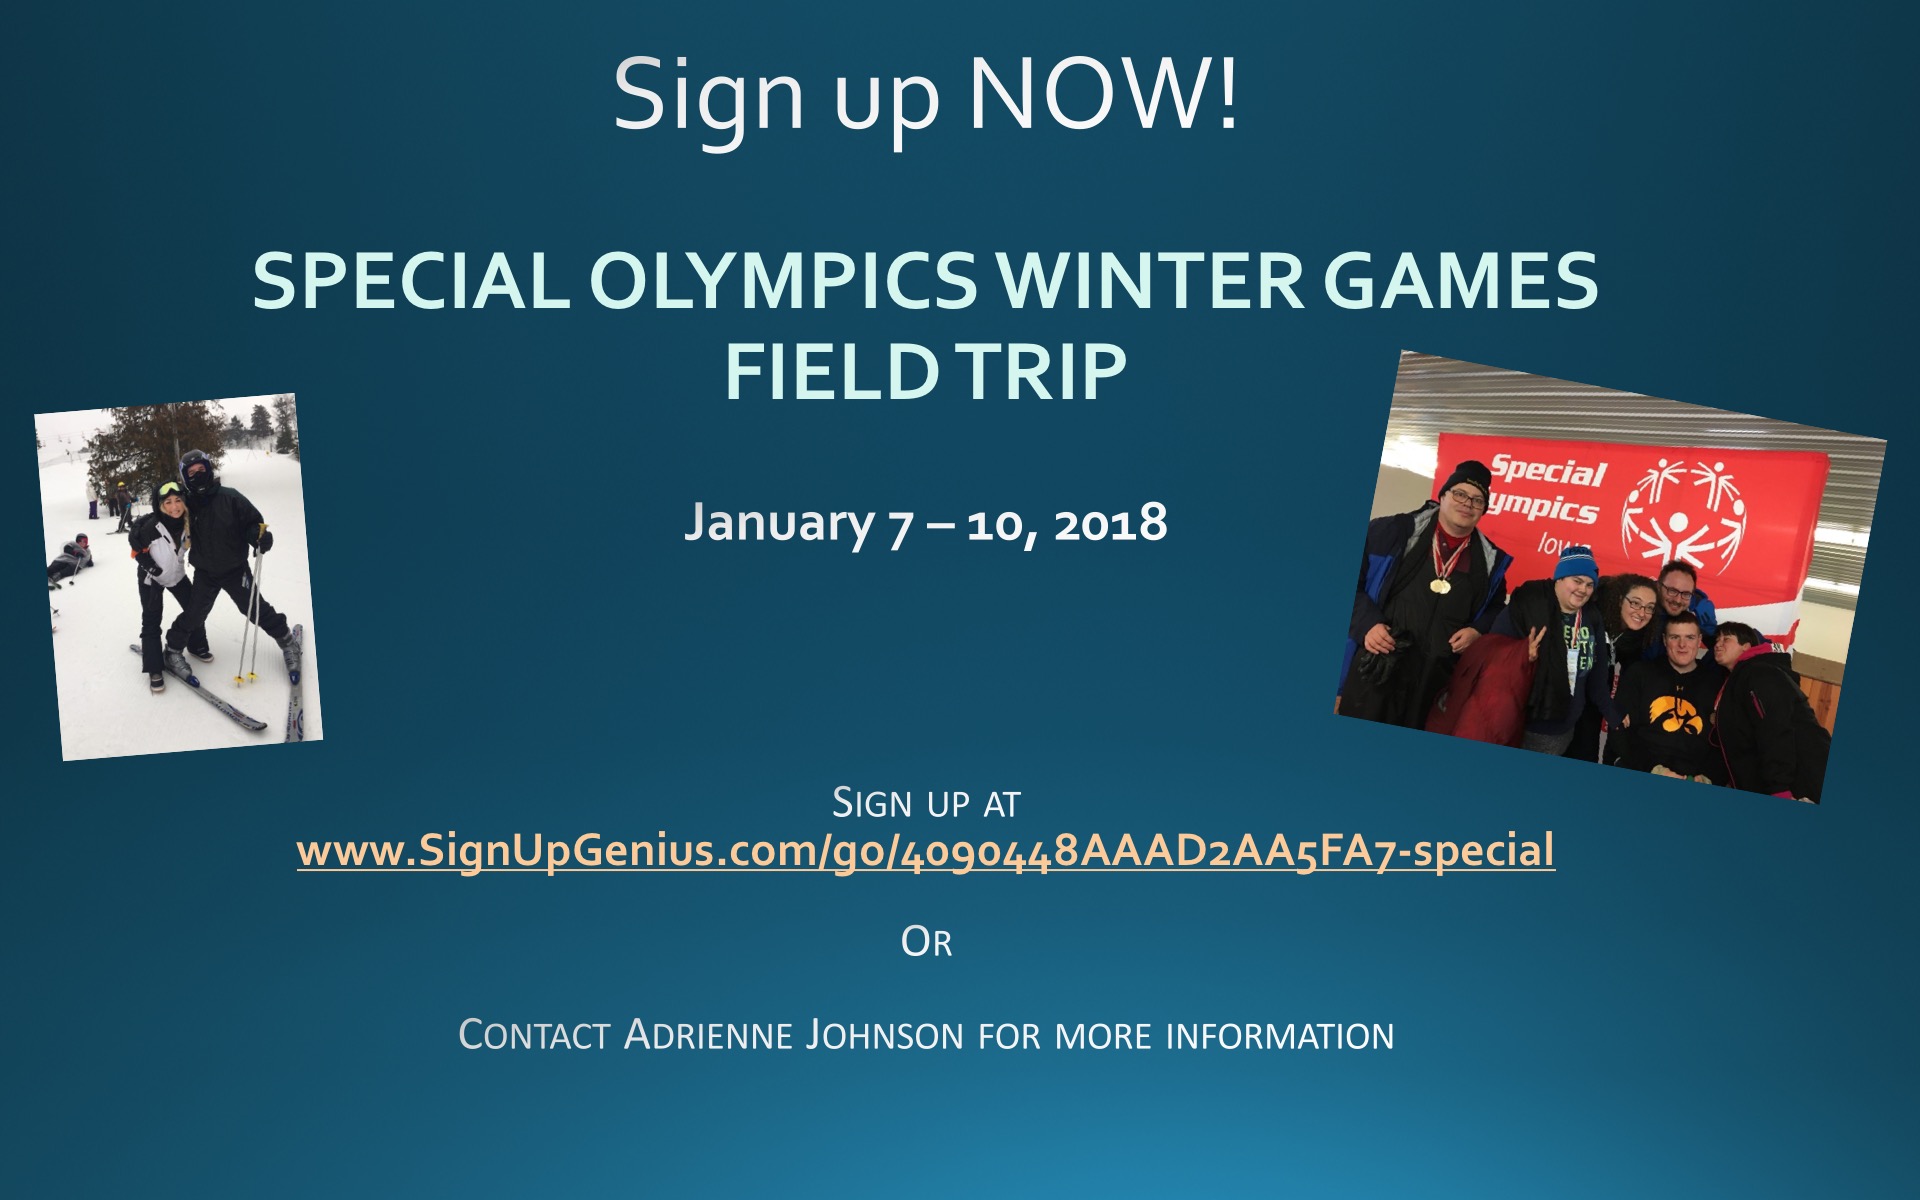 Winter Games Field Trip information - one athlete with student on skis and one group of athletes under Special Olympics sign